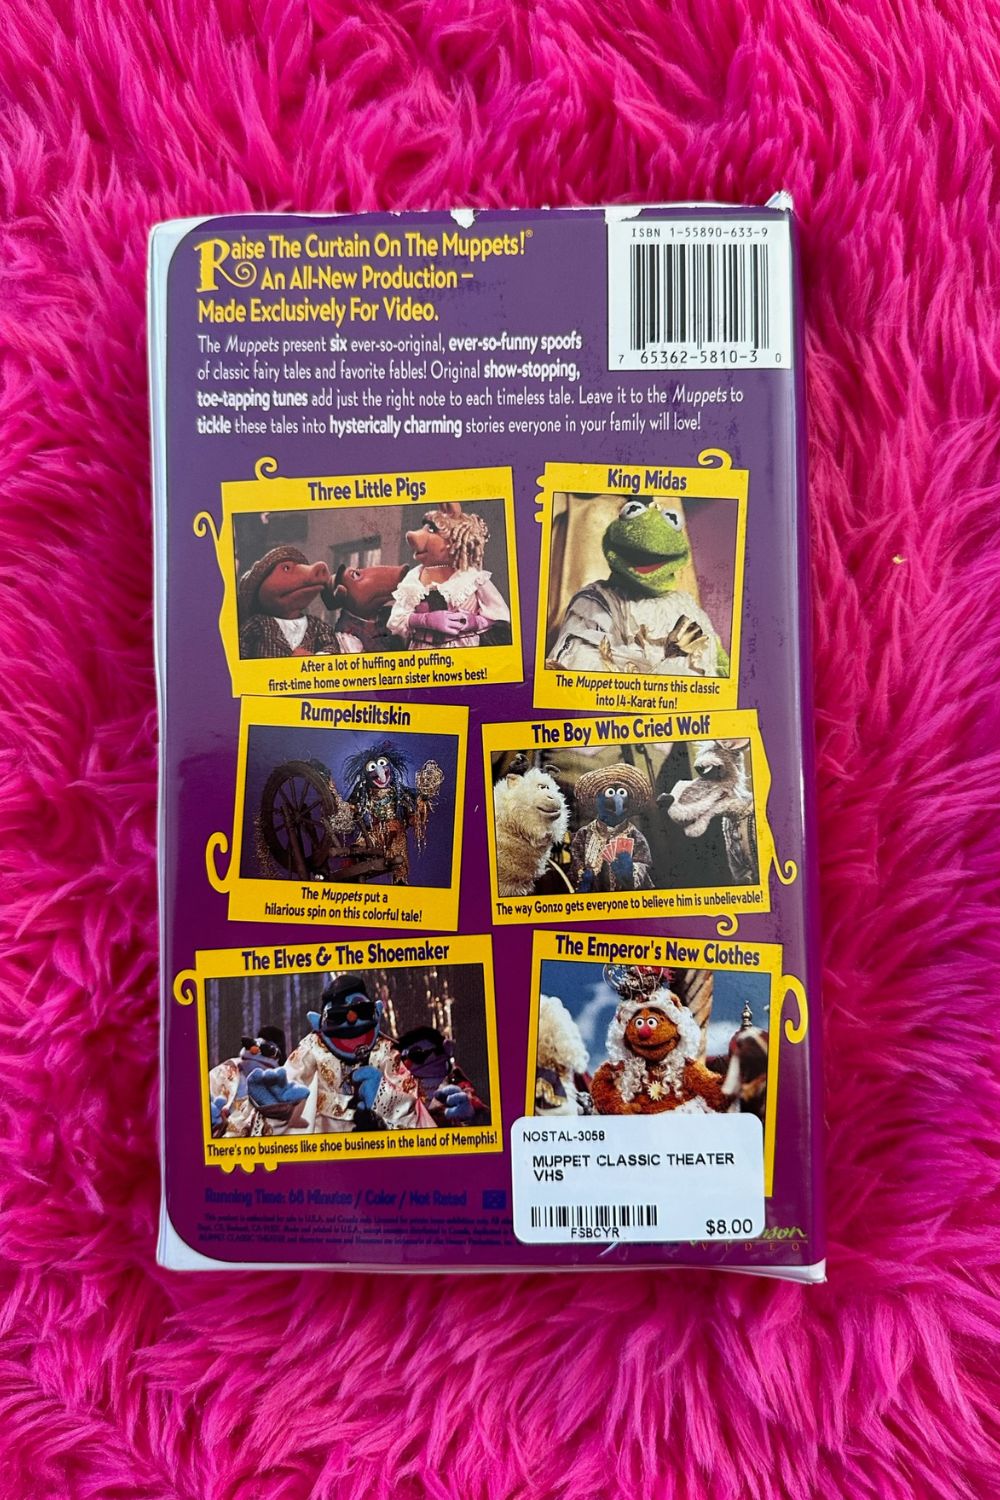 MUPPET CLASSIC THEATER VHS*